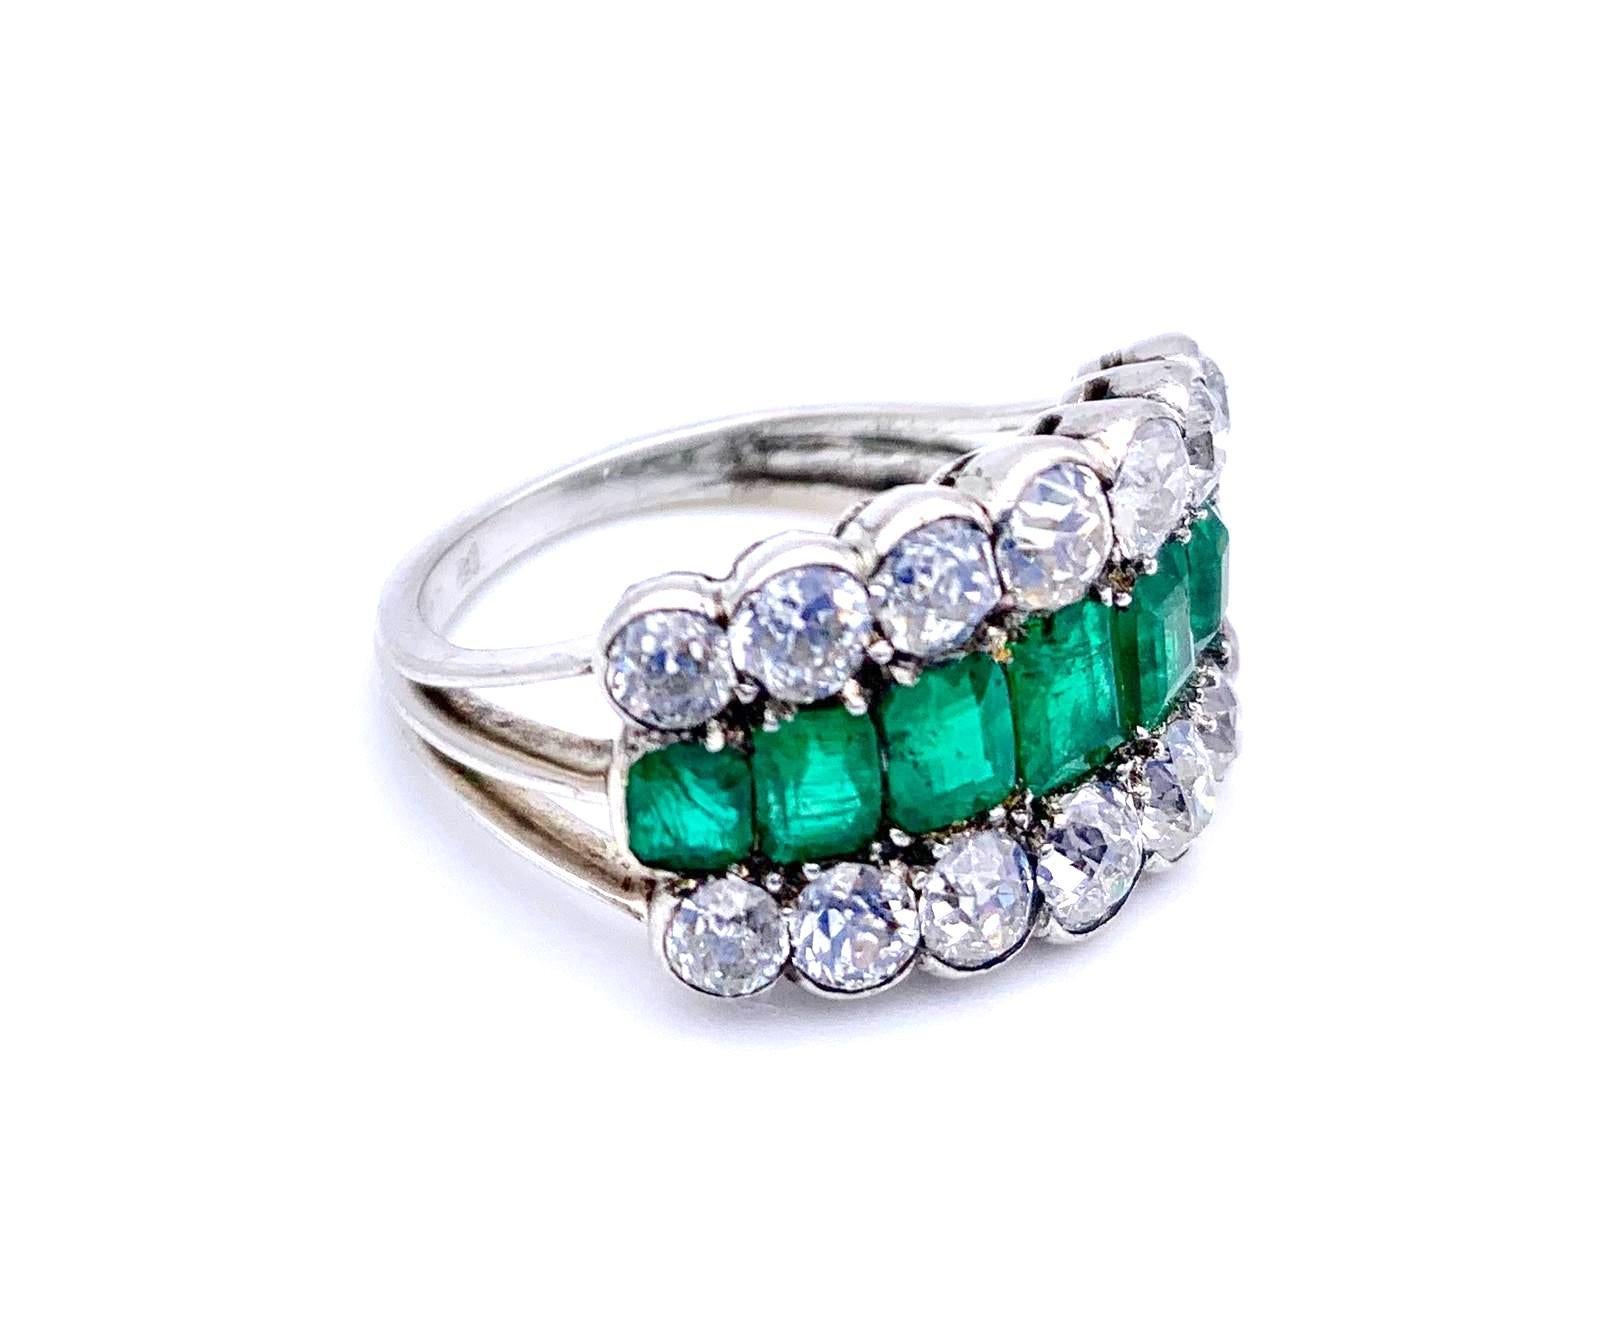 This elegant Art Deco platinum ring is set with 14 diamonds weighing 1,25 ct and 7 emeralds totalling 0,9 ct.
Size US 6